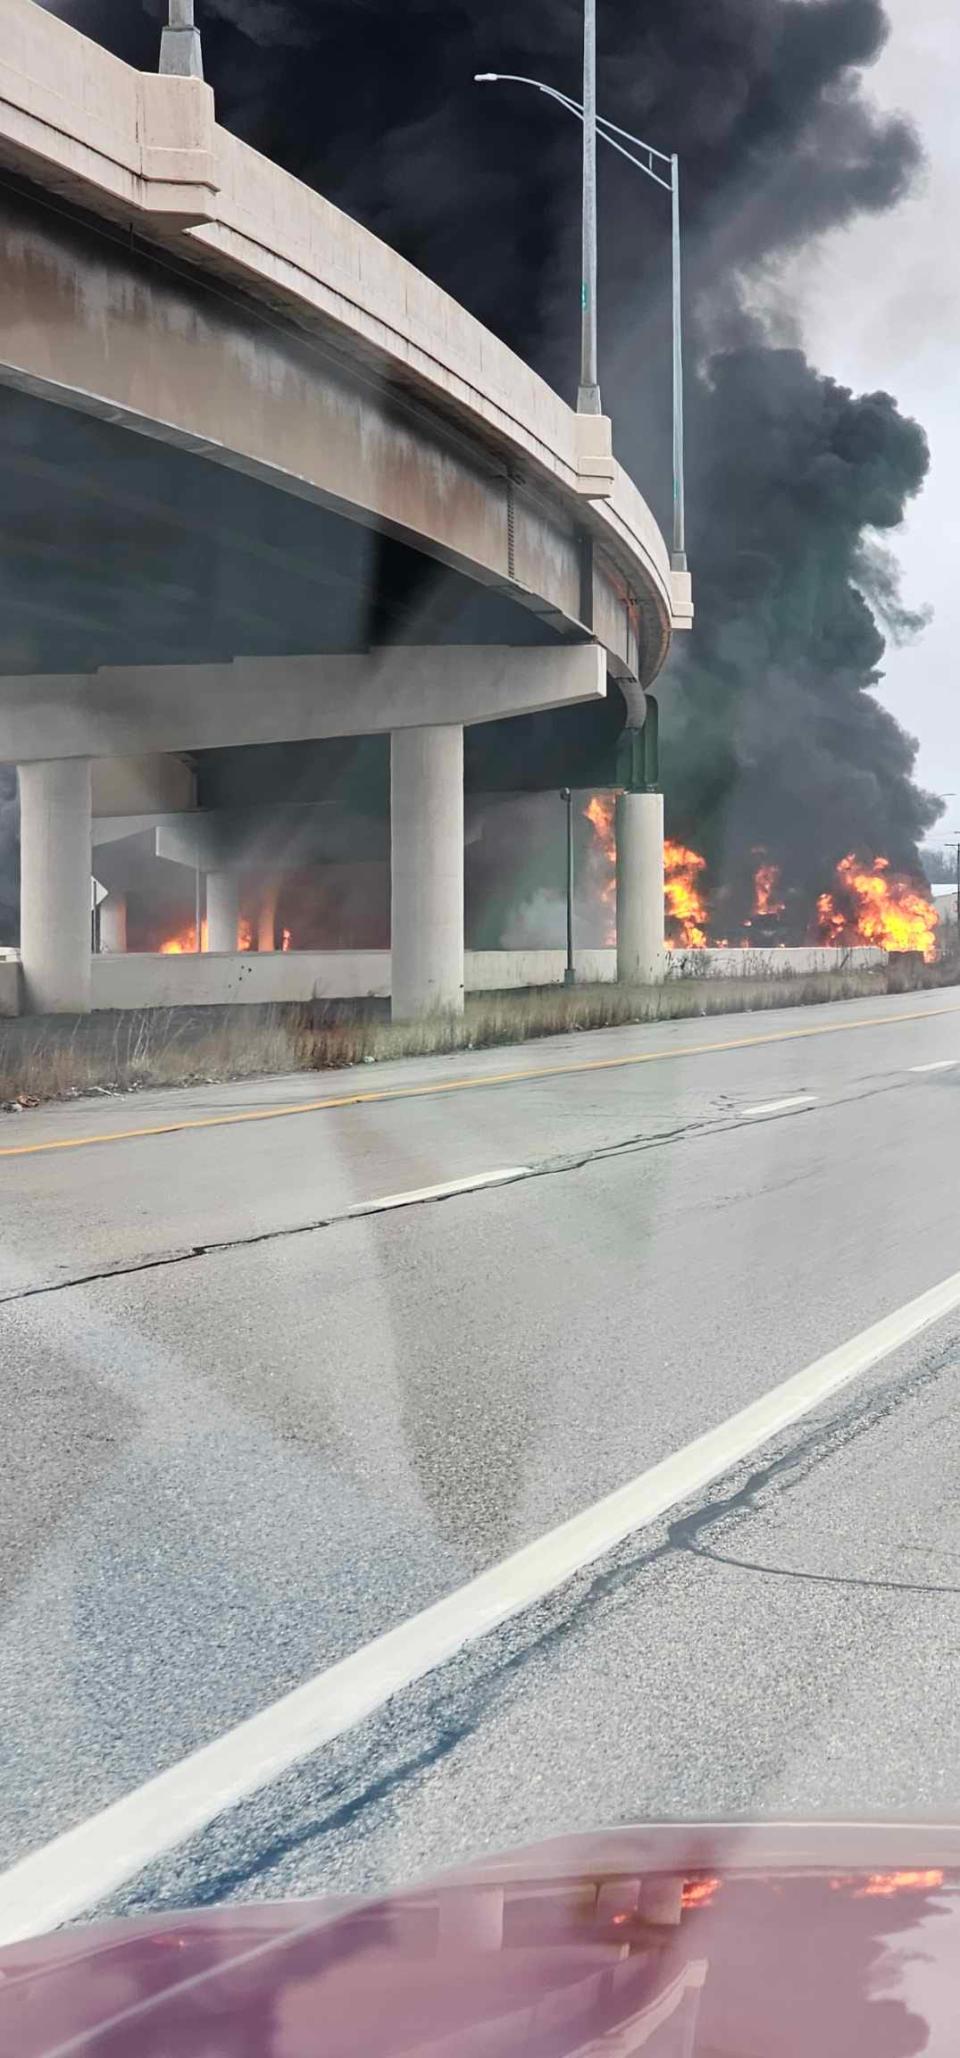 A tanker flipped and caught fire on state Route 8 Saturday morning in Macedonia. This photo from a driver shows the truck on fire before emergency responses arrived.